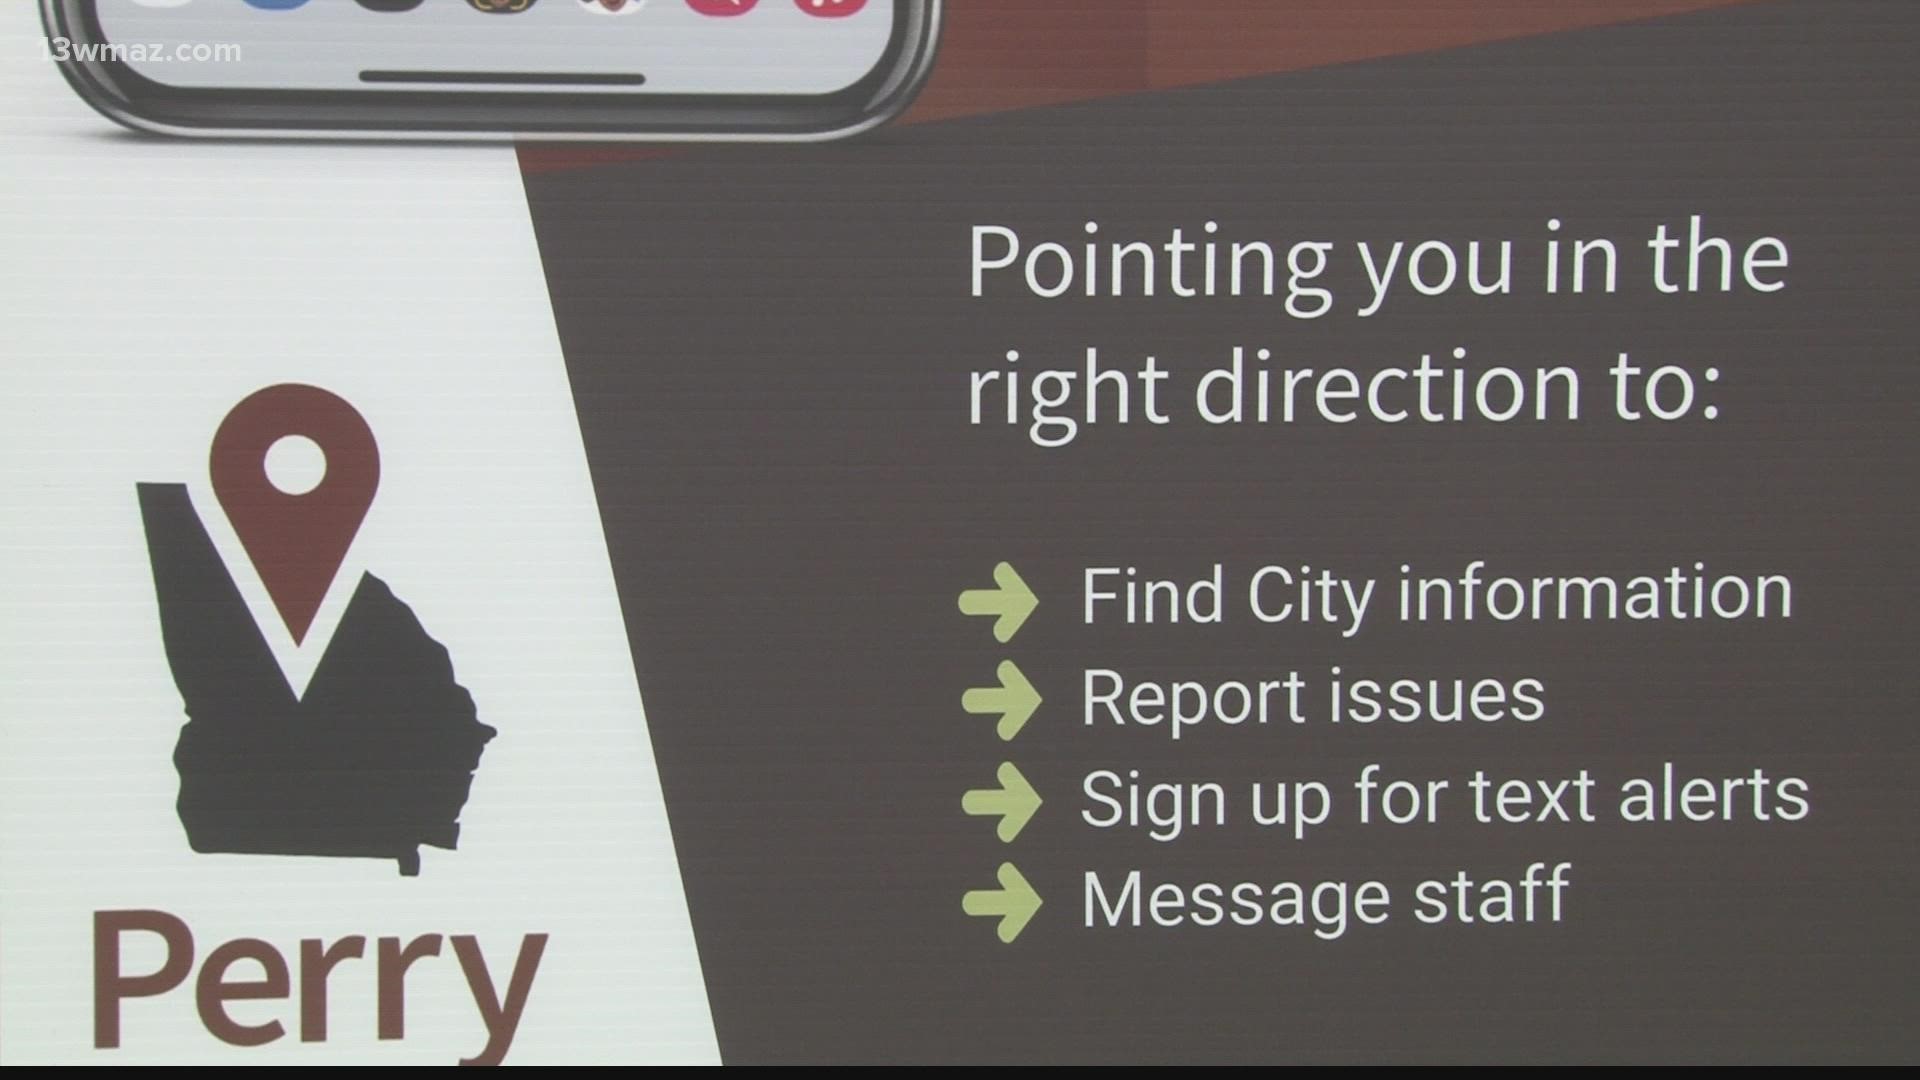 The platform 'Perry Points' launched a week ago allowing people to text staff, report issues, and ask questions